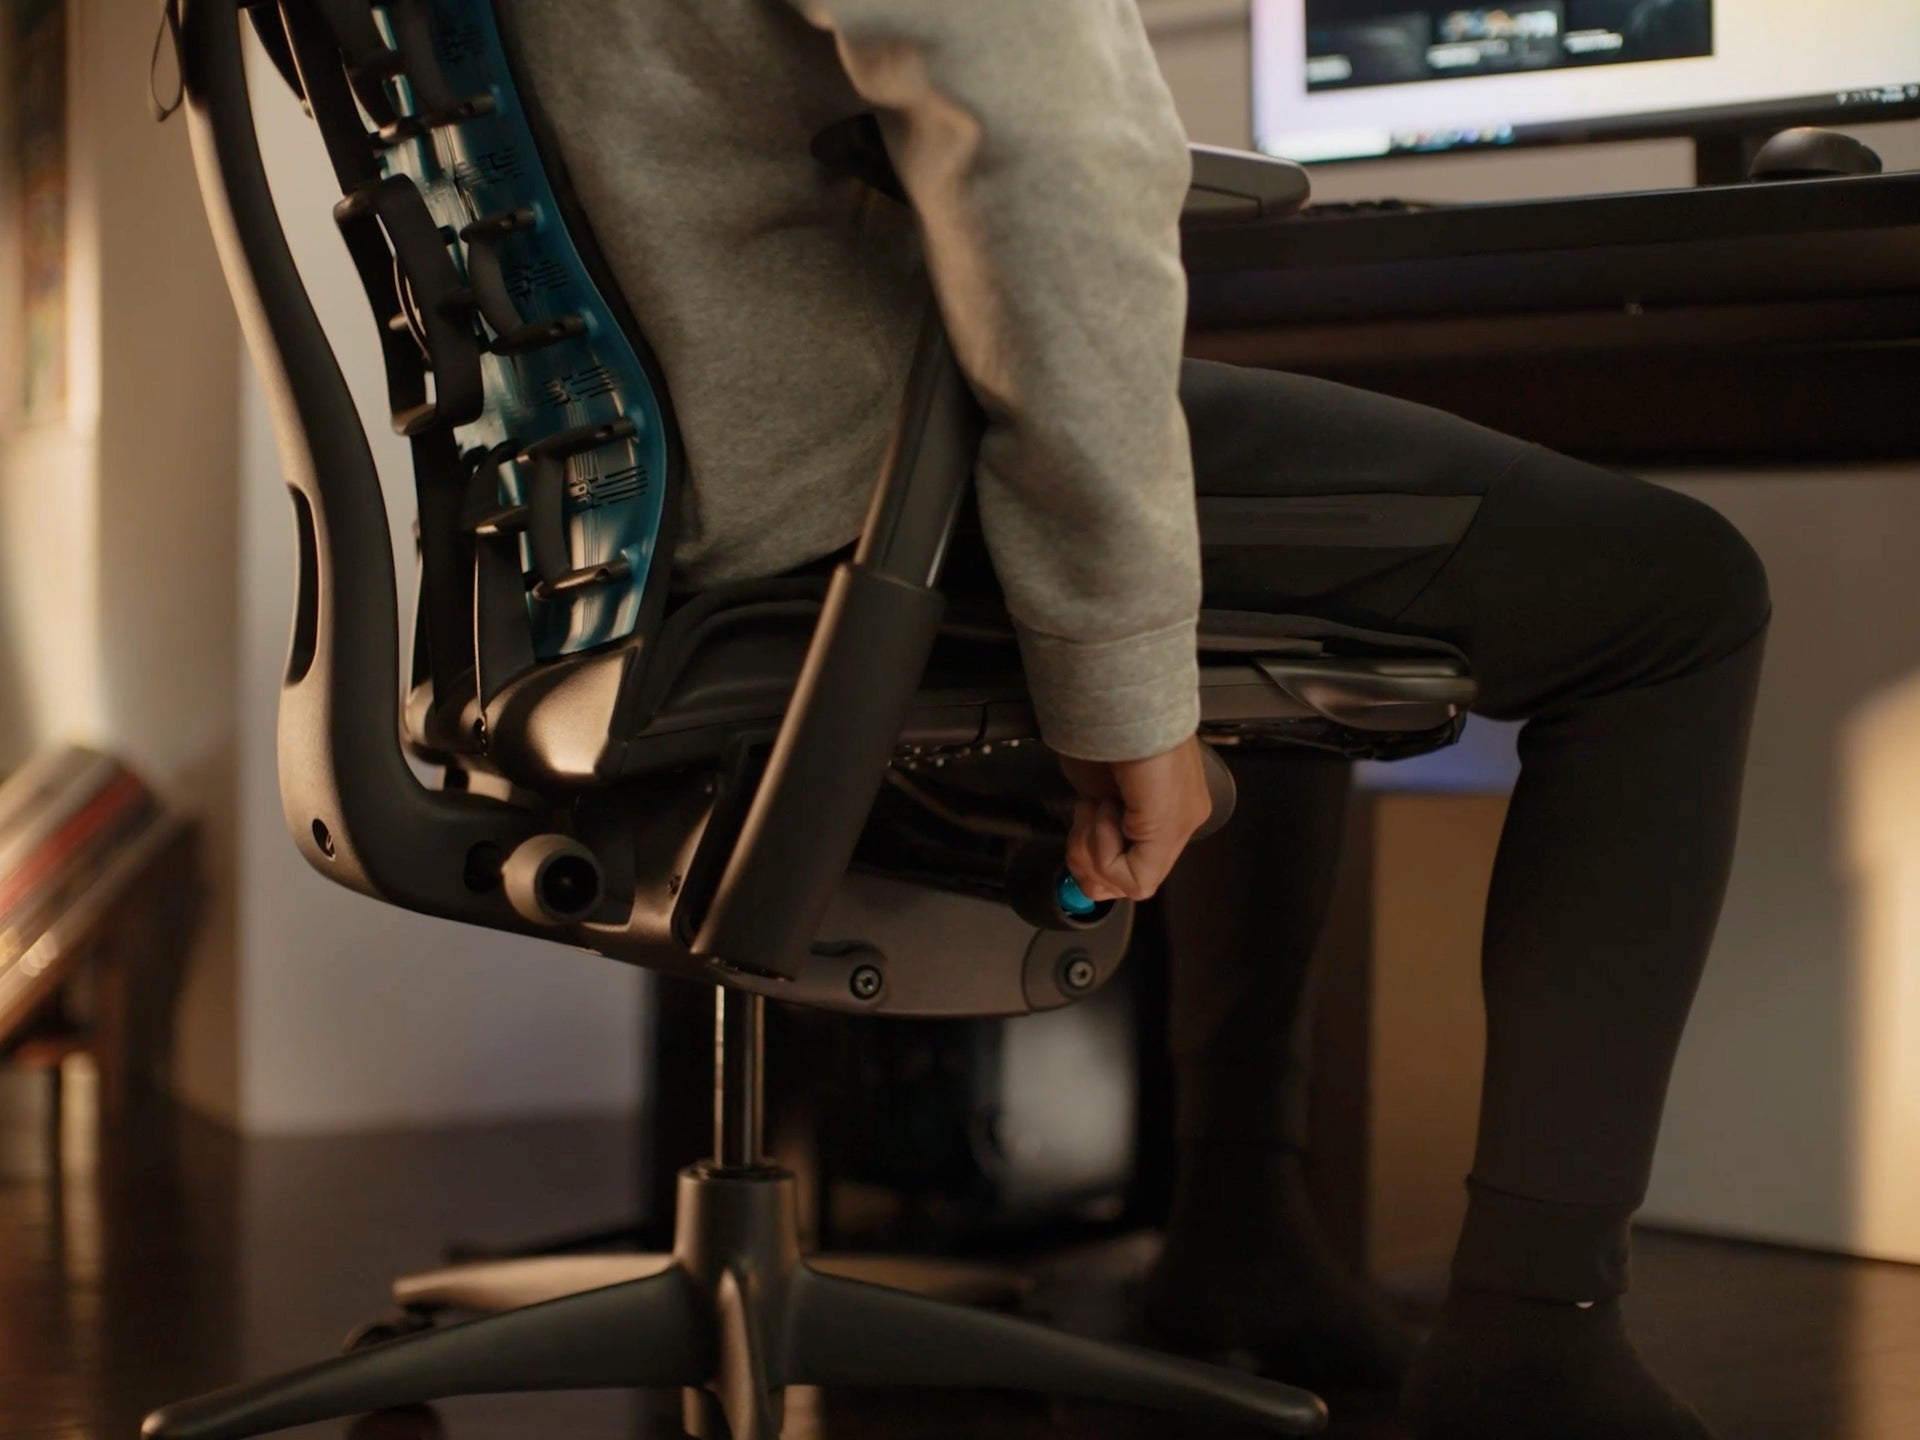 A close-up image of the side of the Embody Gaming Chair with a person adjusting seat height mechanism.